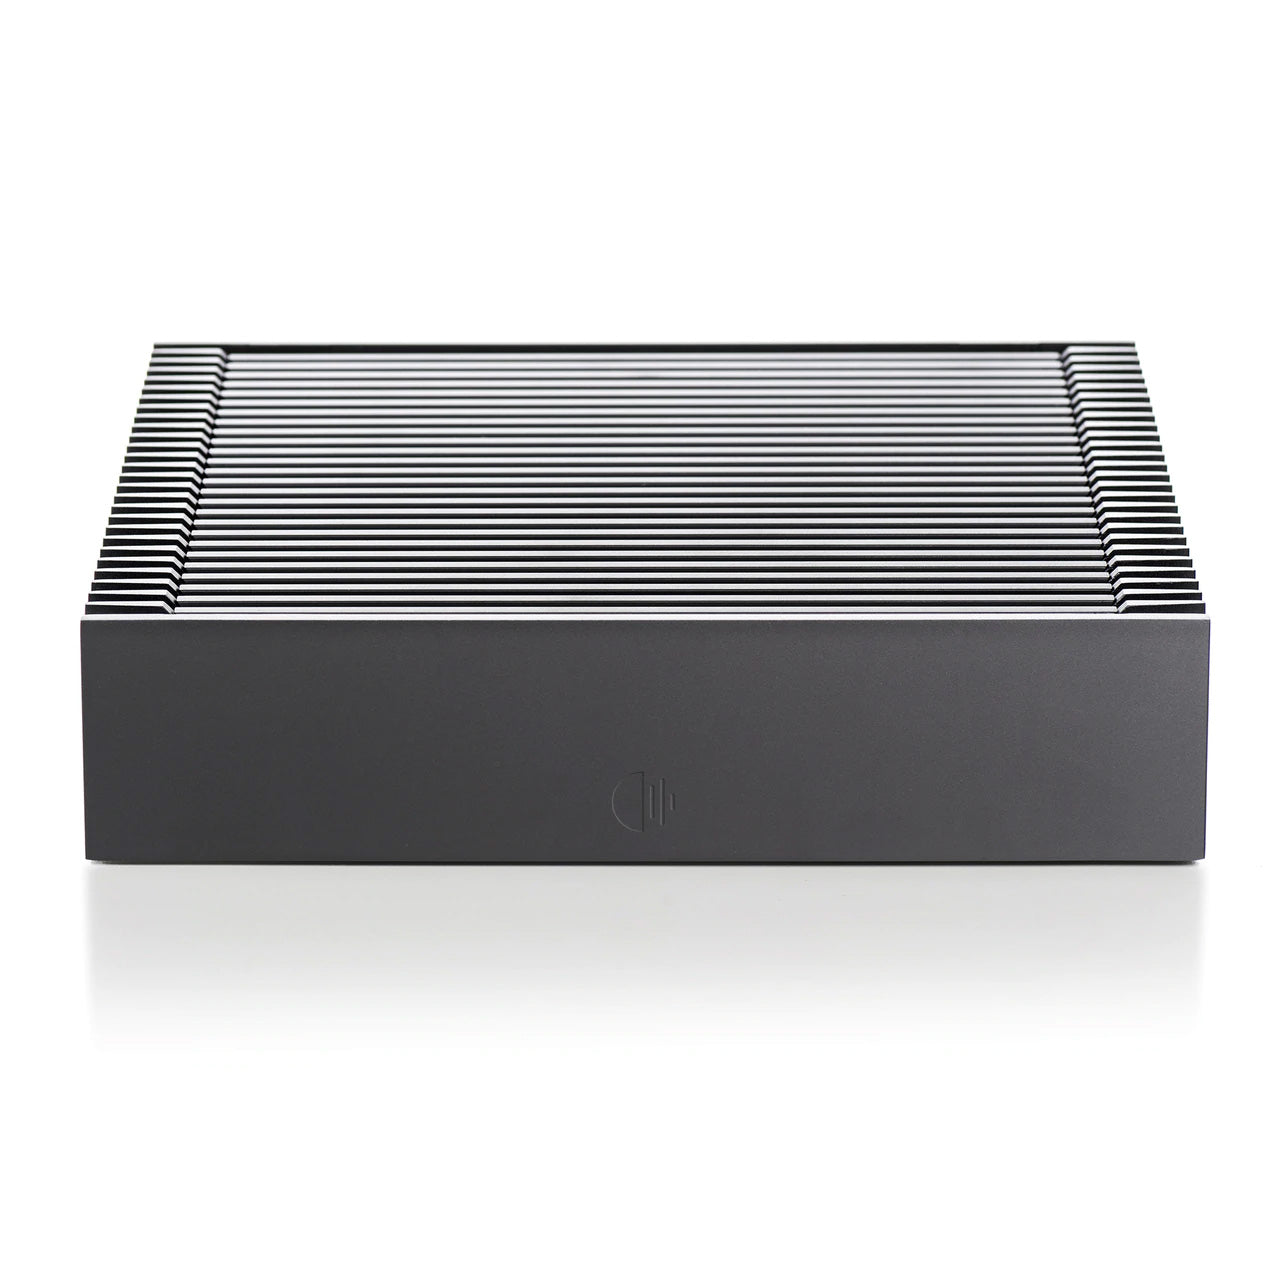 Roon Nucleus Plus Music Server (2022) (Package)